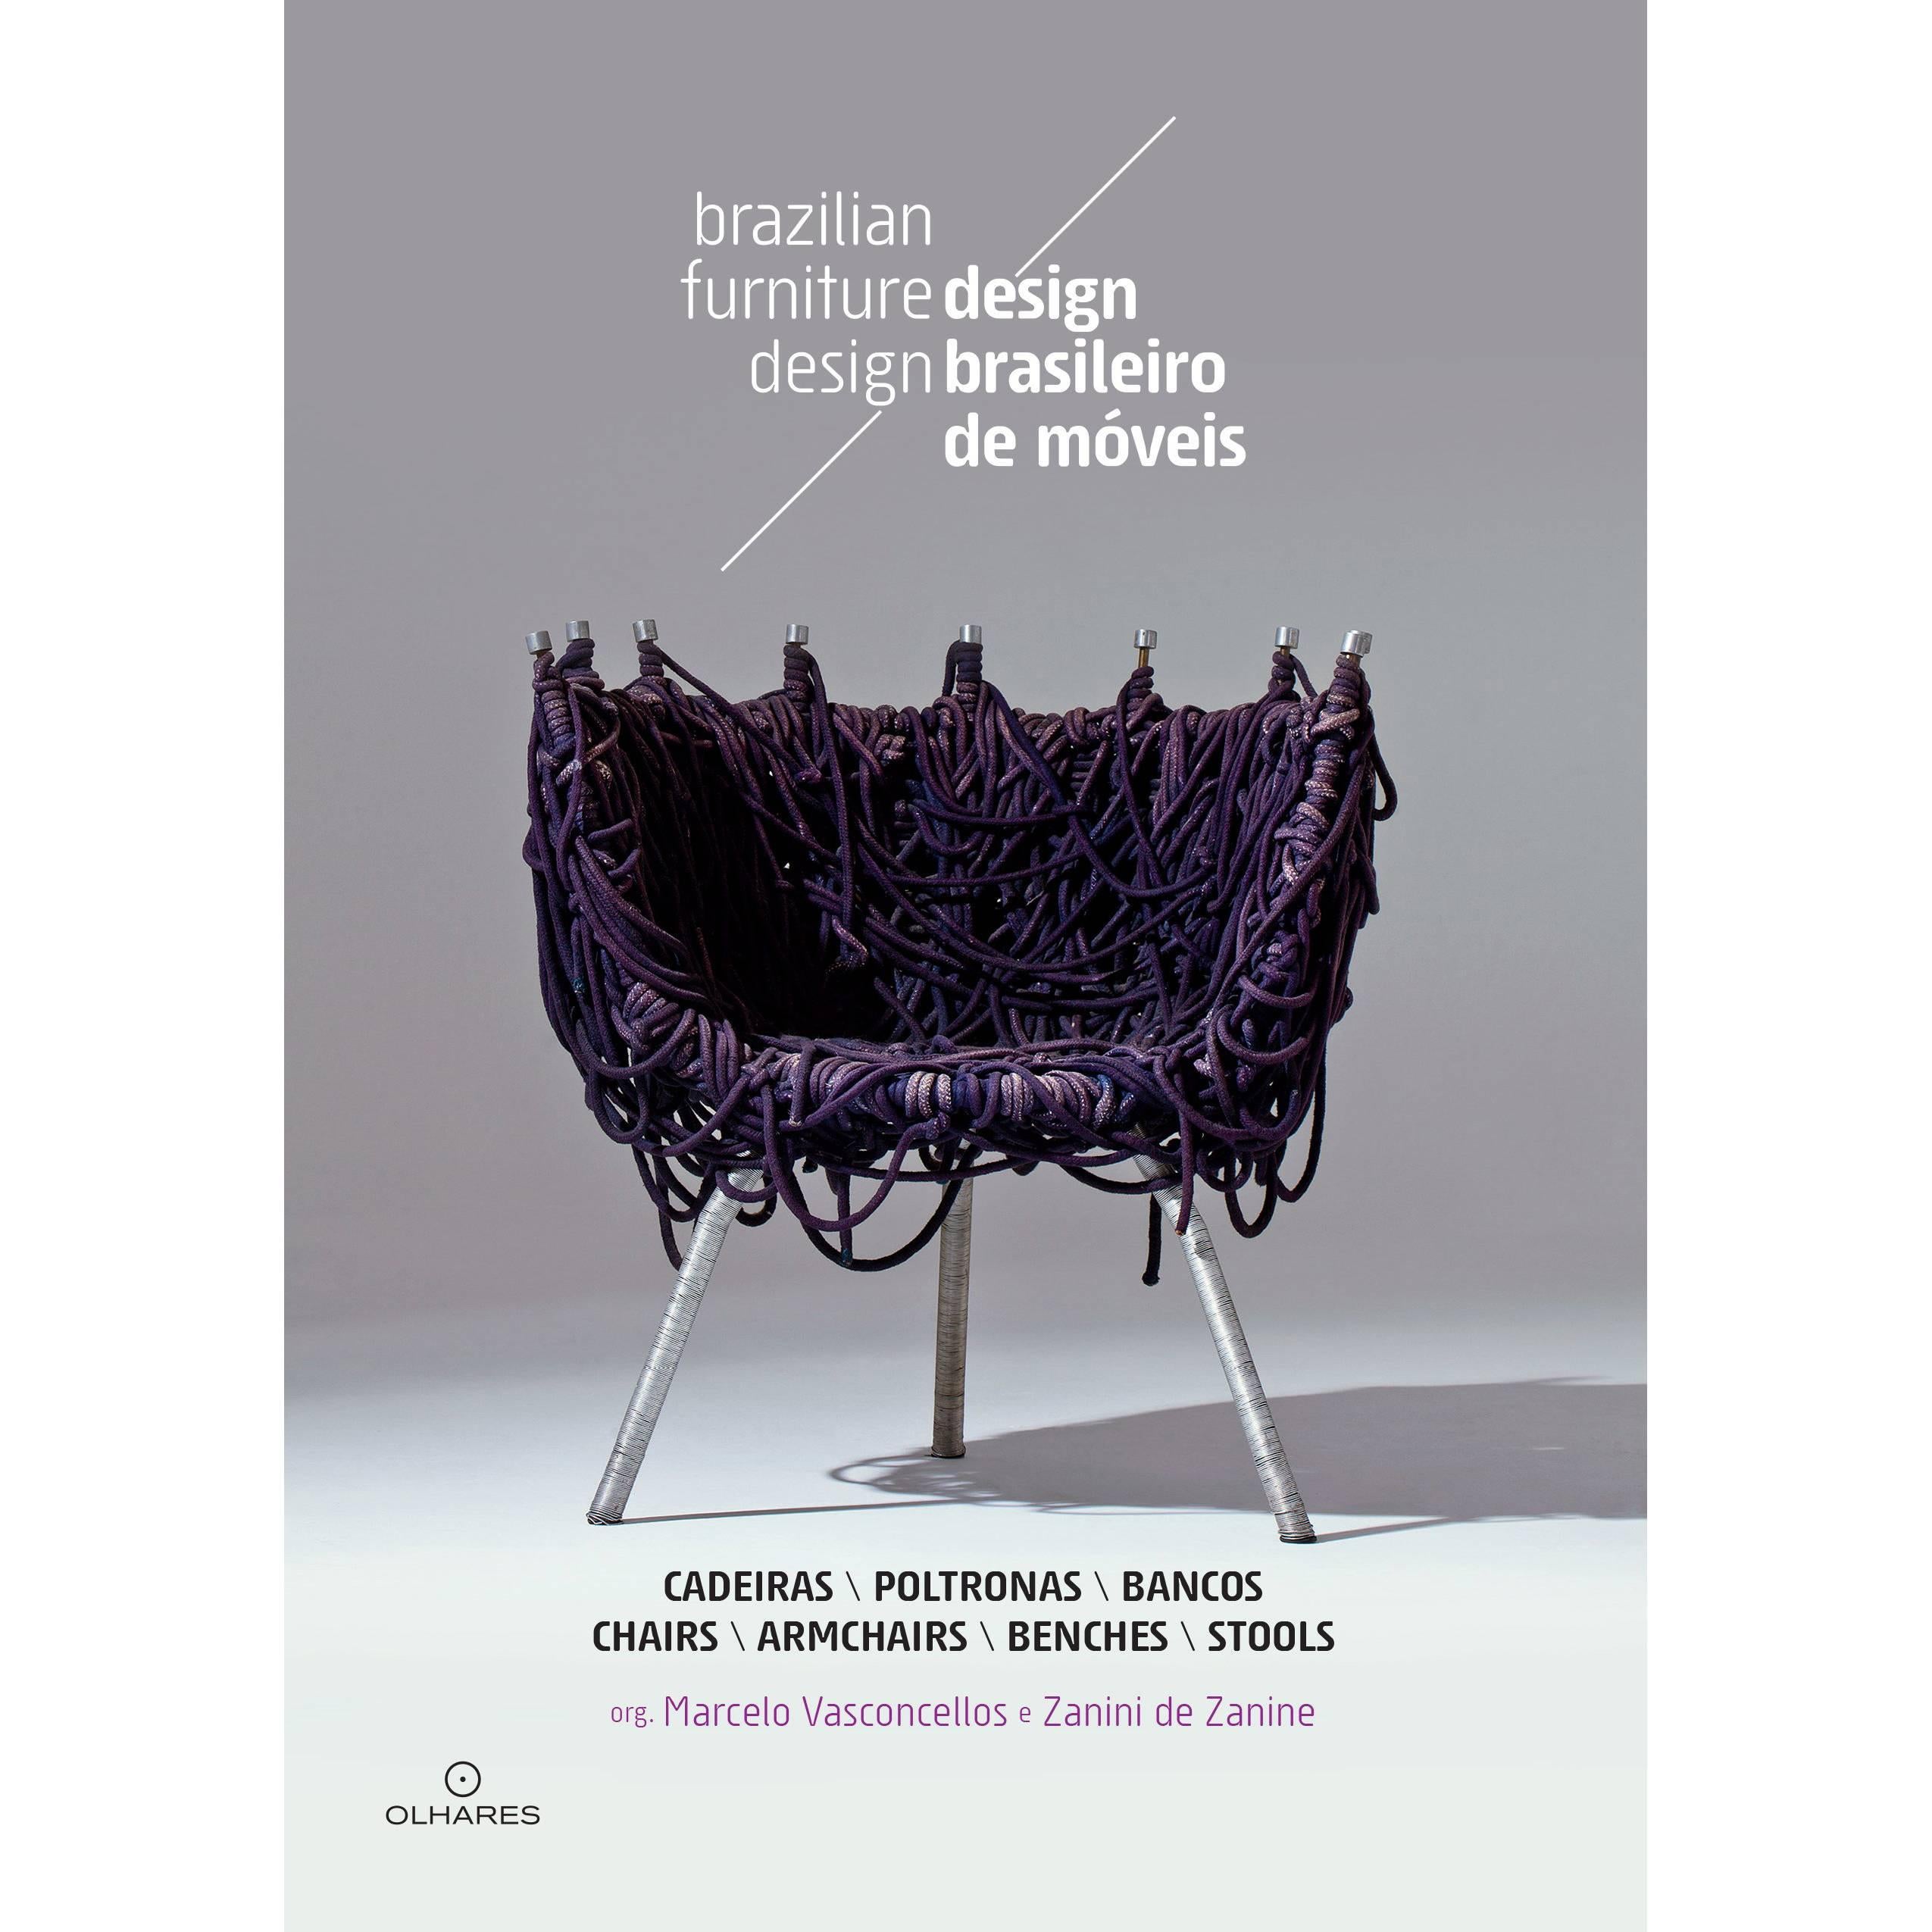 "Brazilian Furniture Design - Chairs, Armchairs, Benches and Stools" Books For Sale